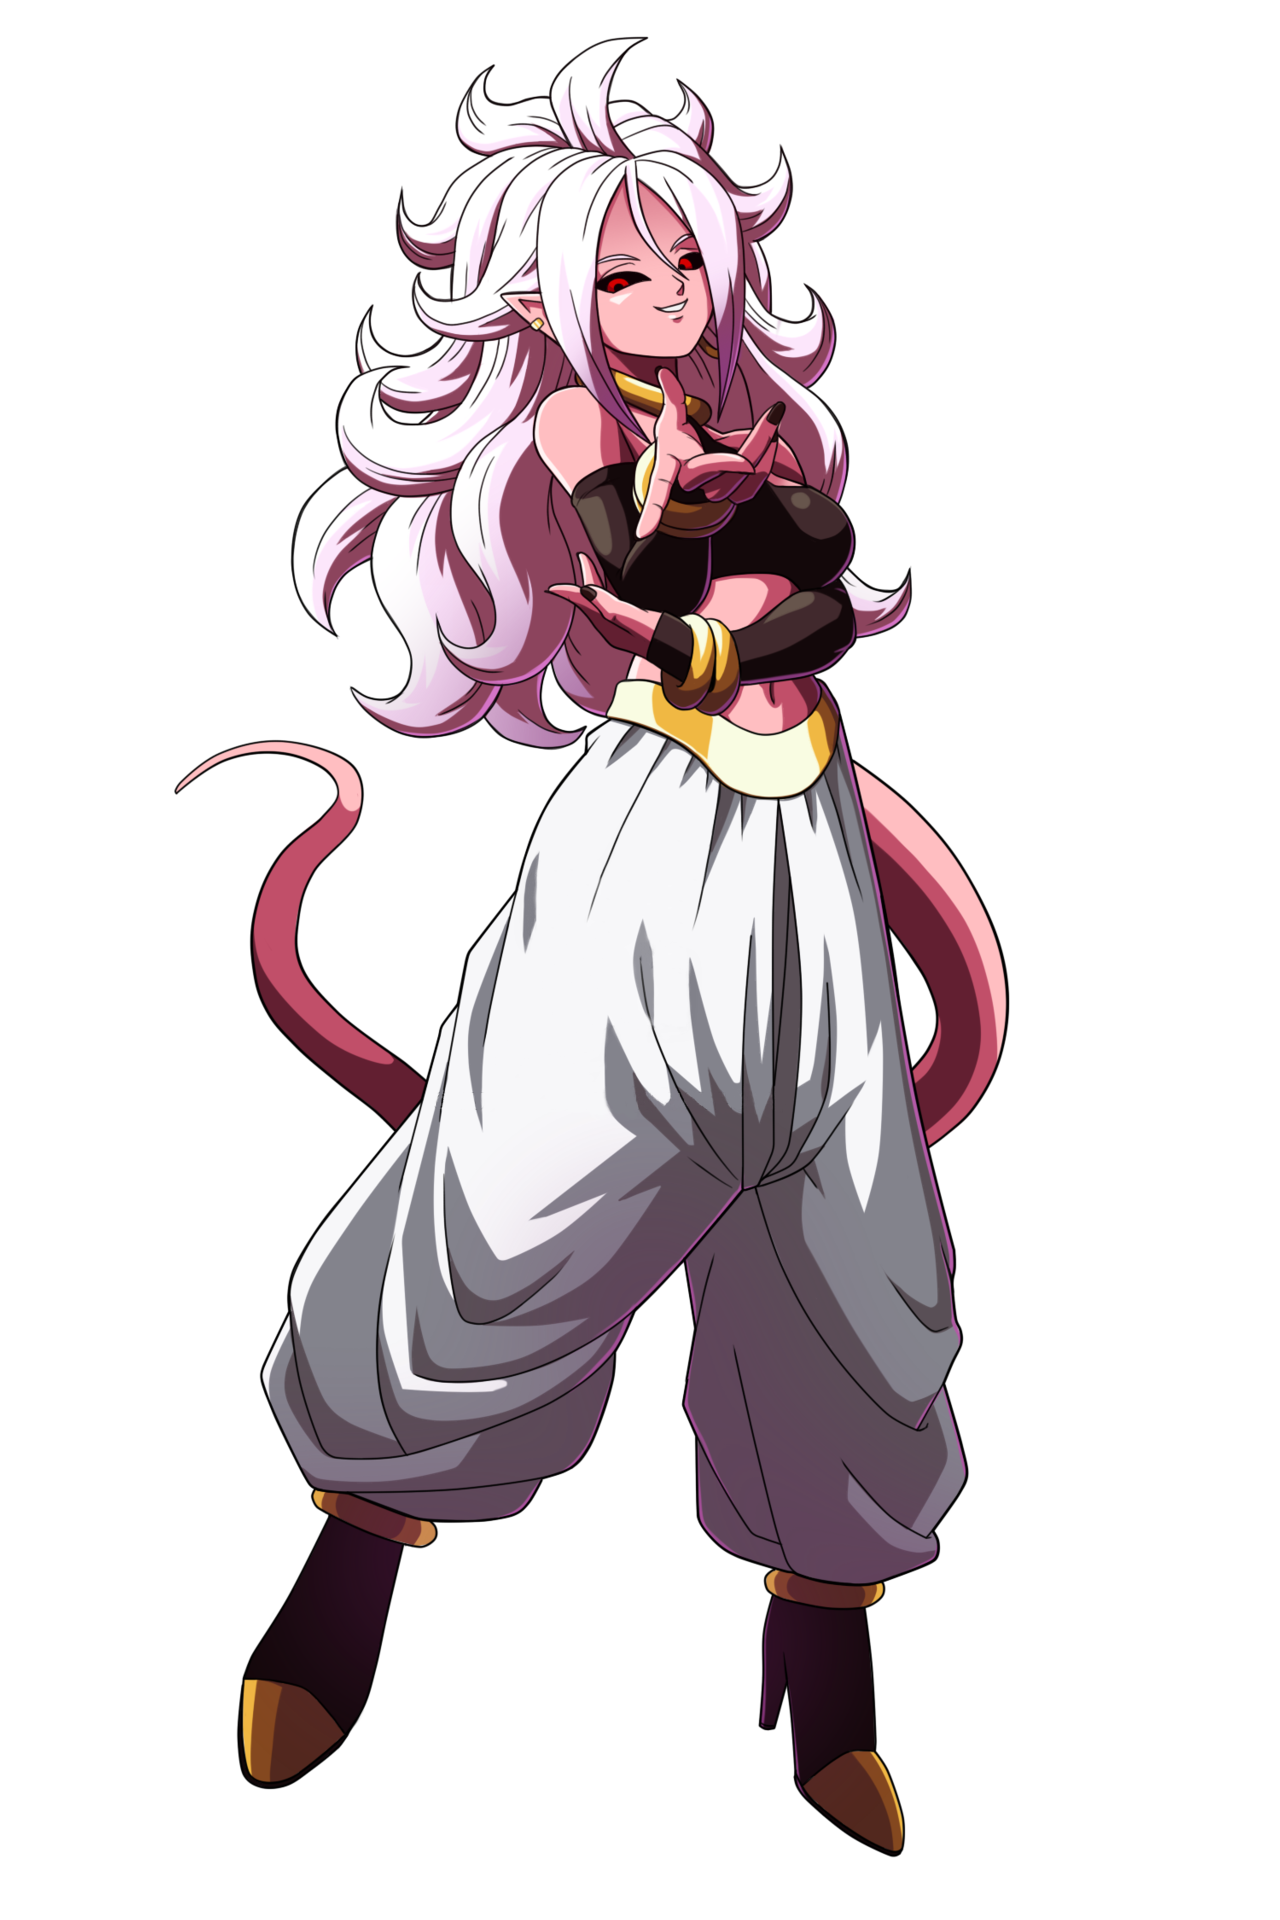 15 Minutes Of Android 21 Dragon Ball Fighterz Gameplay And Official Character Artwork